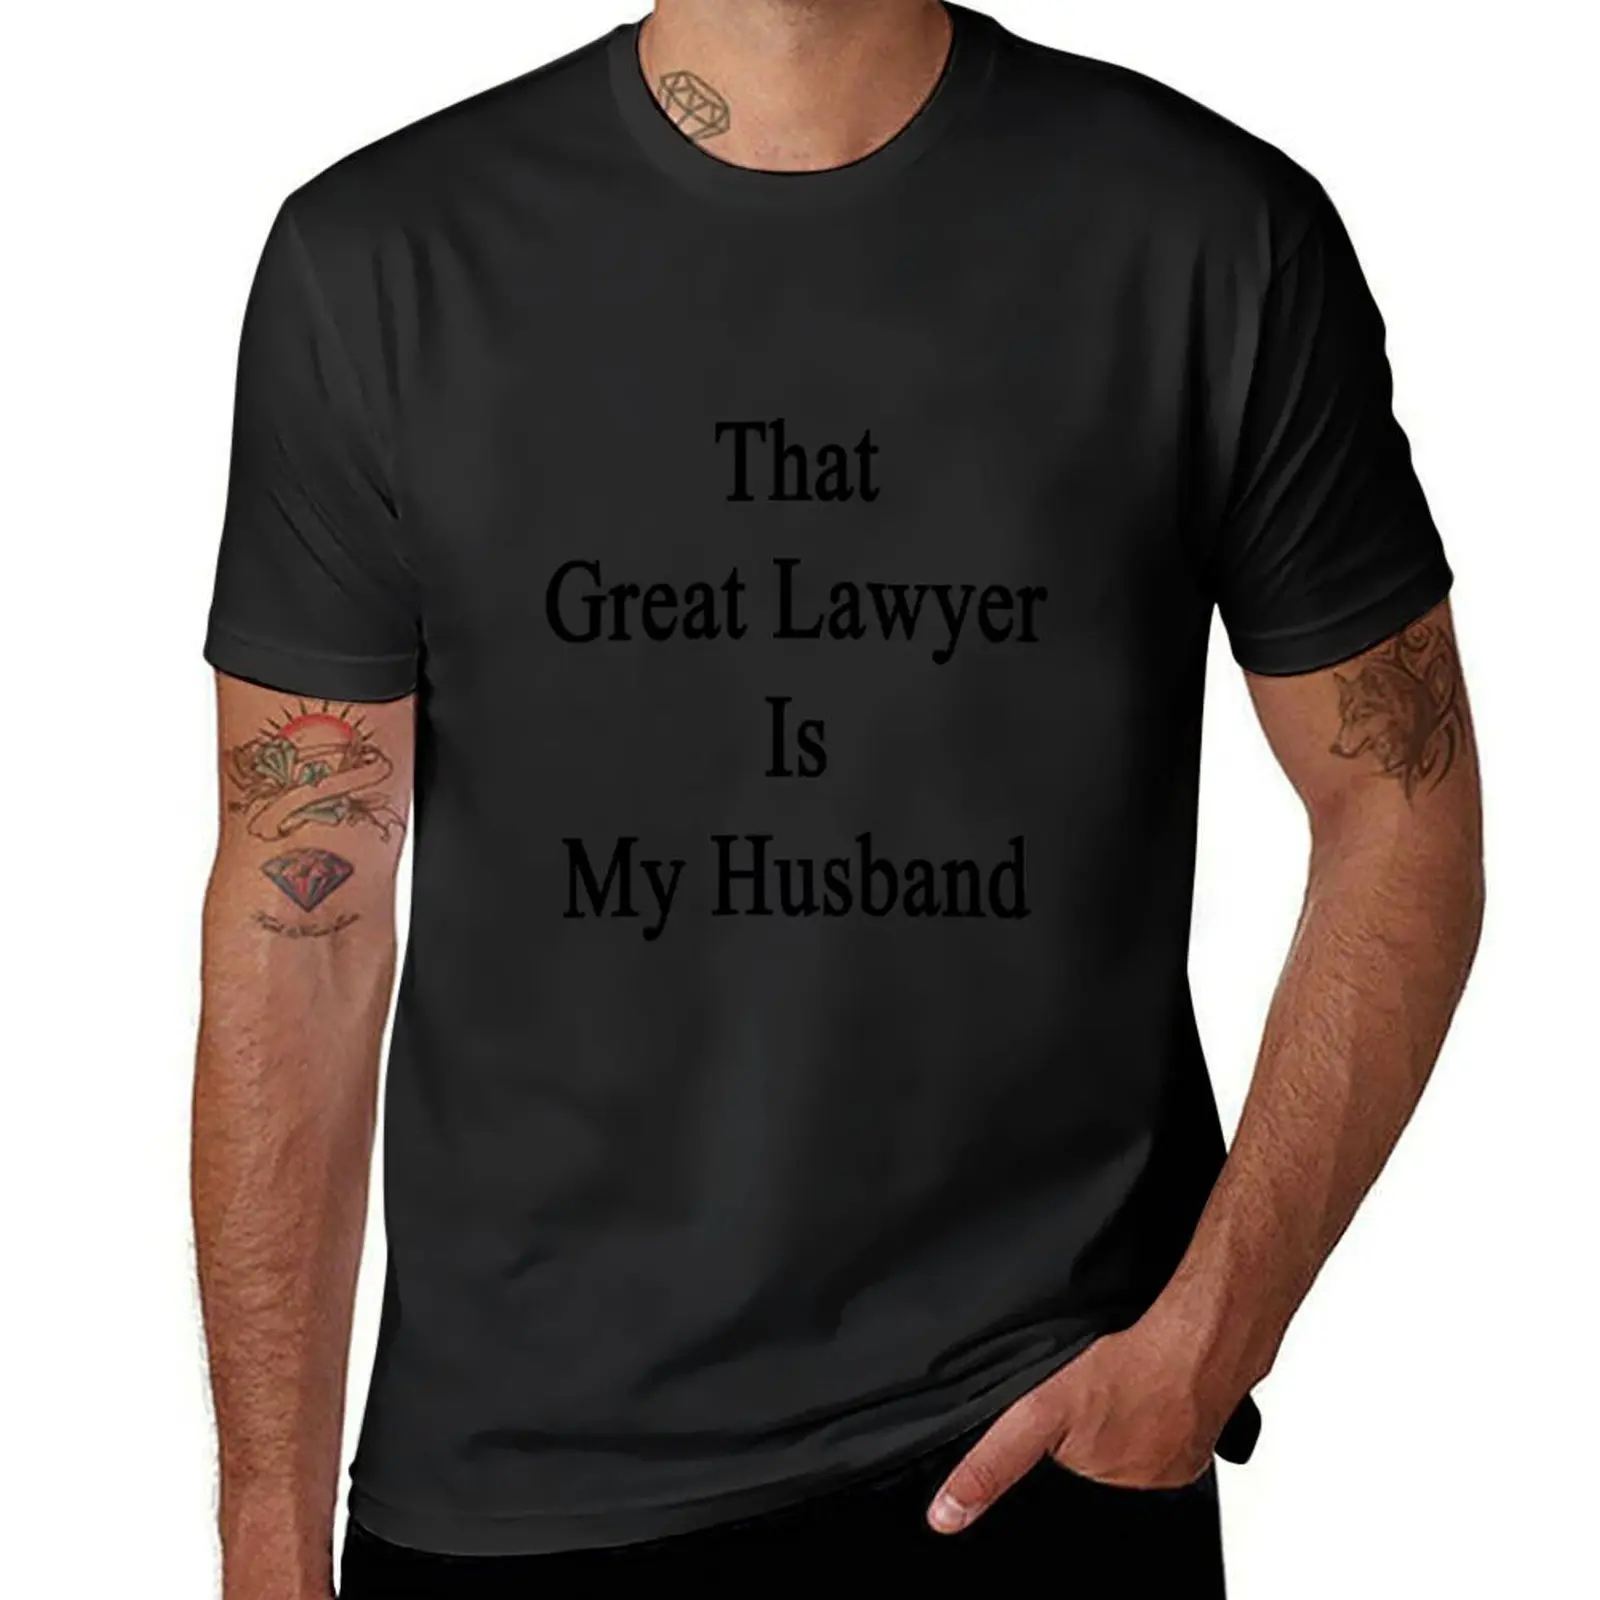 

That Great Lawyer Is My Husband T-Shirt oversizeds blacks funnys T-shirts for men cotton